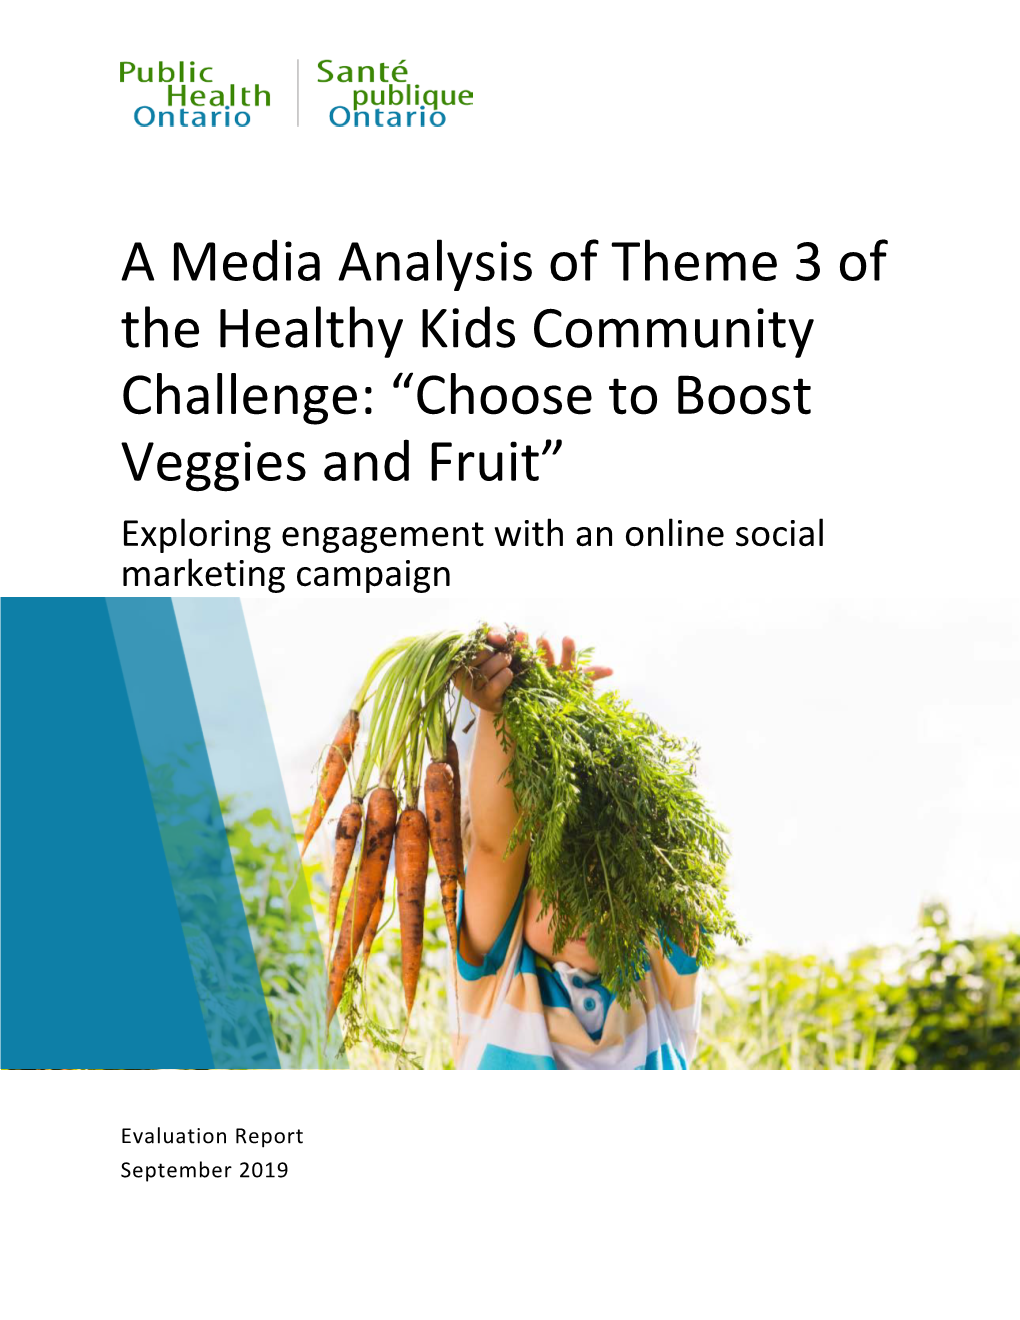 A Media Analysis of Theme 3 of the Healthy Kids Community Challenge